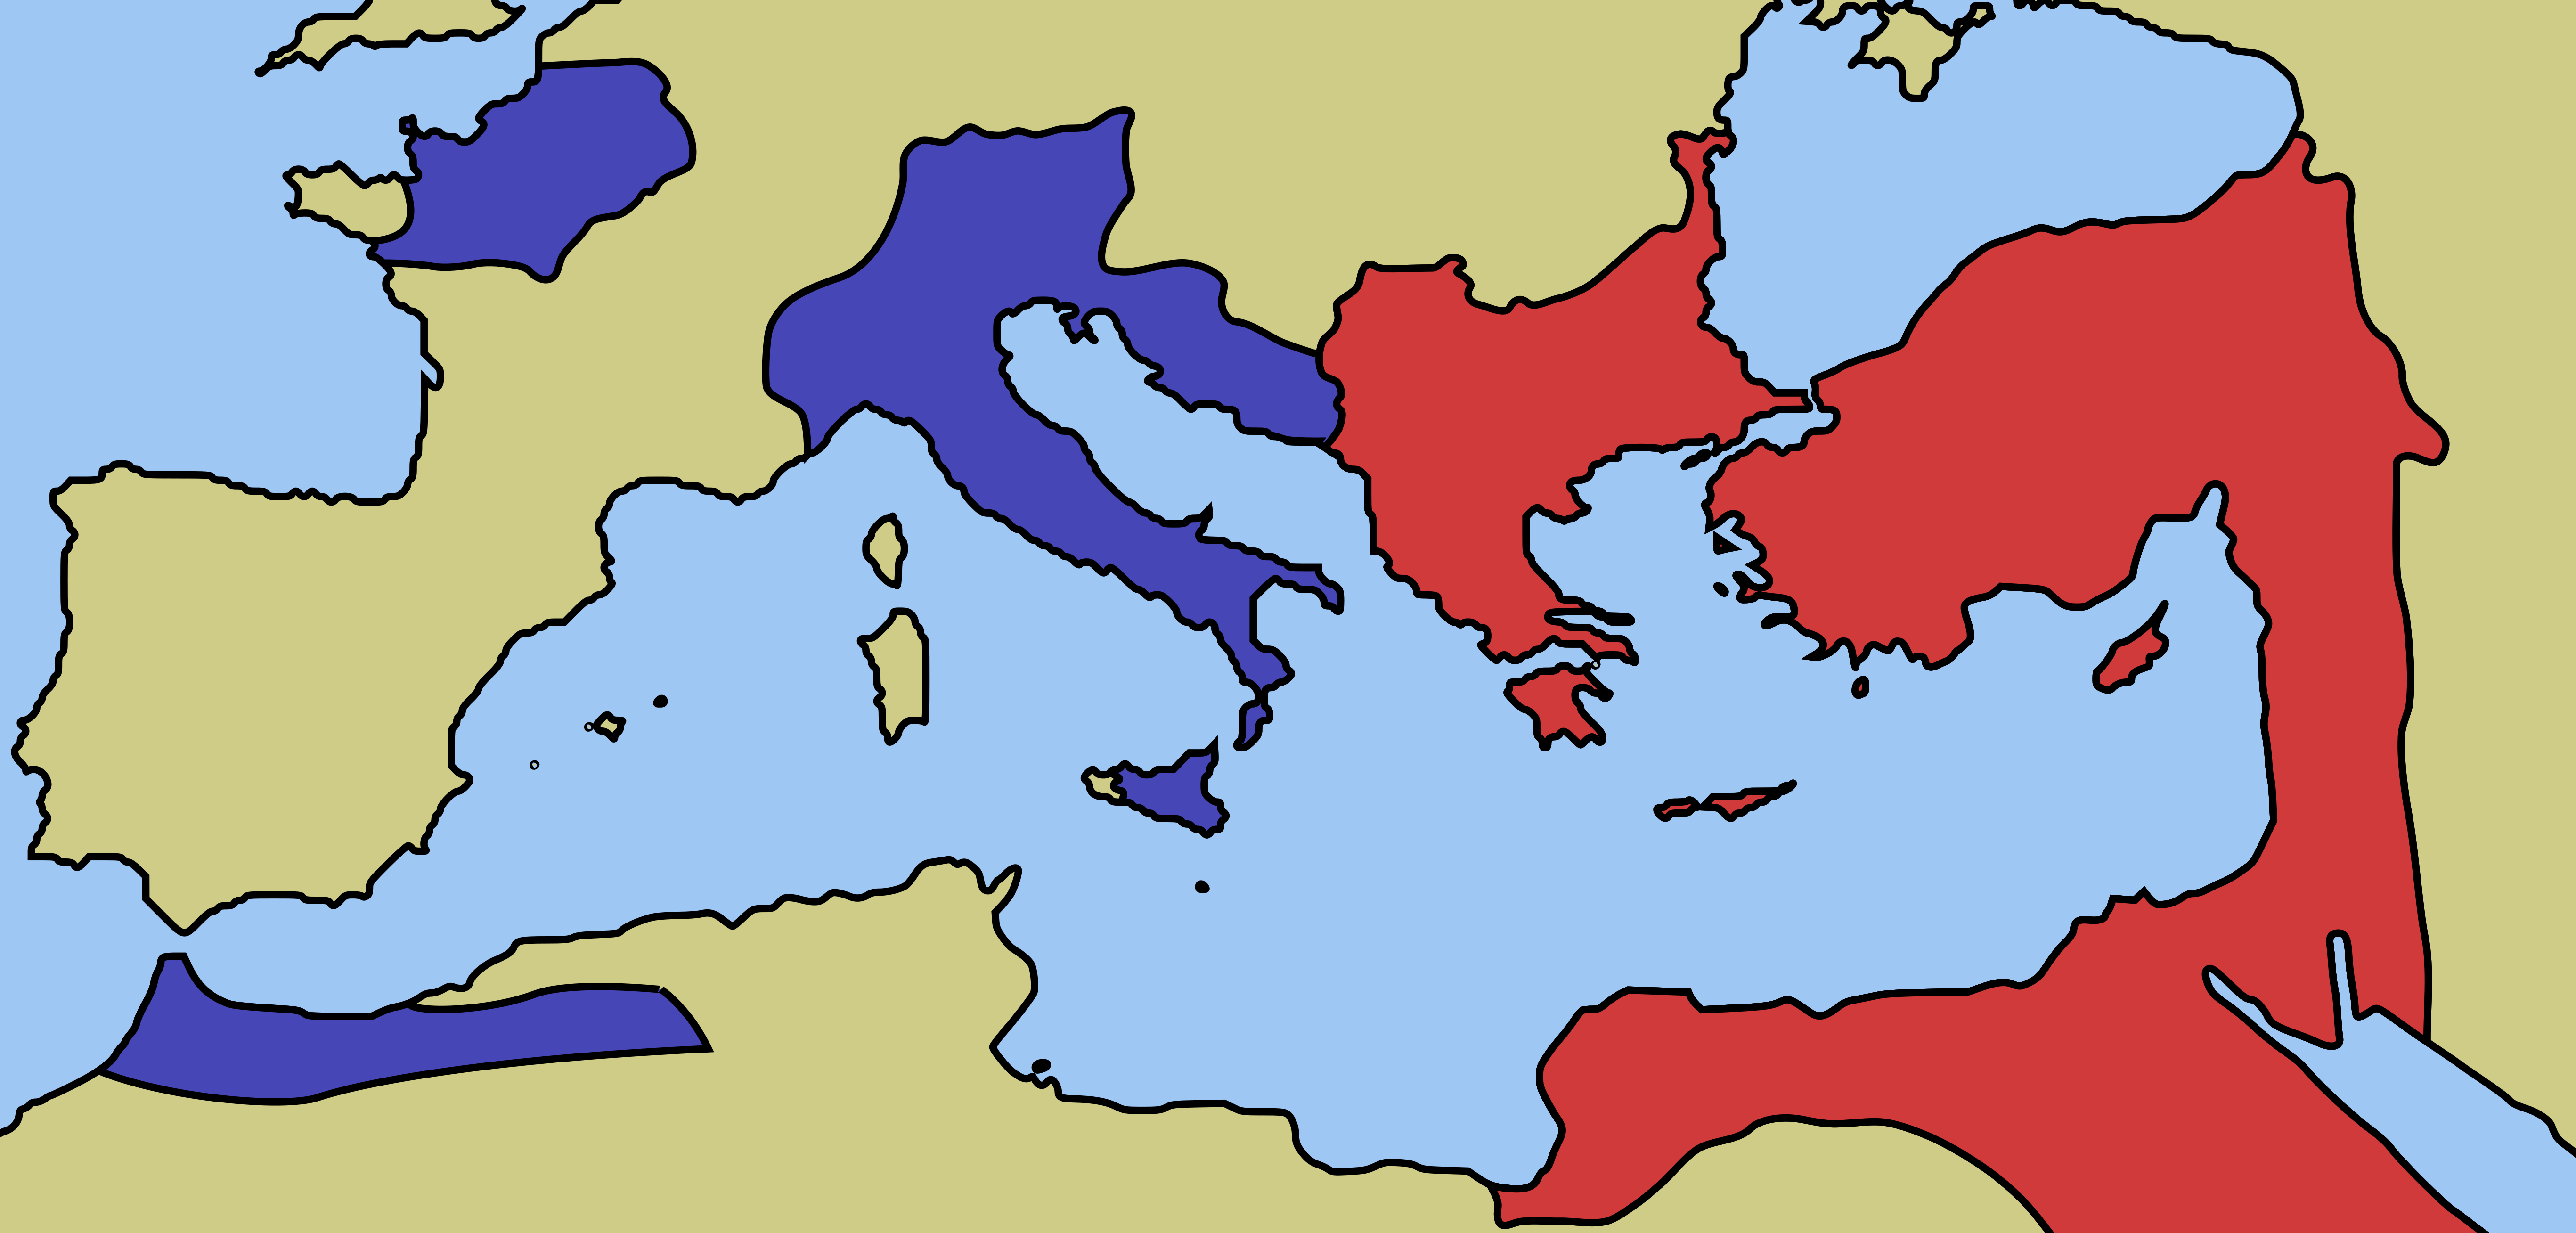 Map view of the Roman Empire at the time of its greatest expansion at the death of Emperor Trajan in 117 AD.